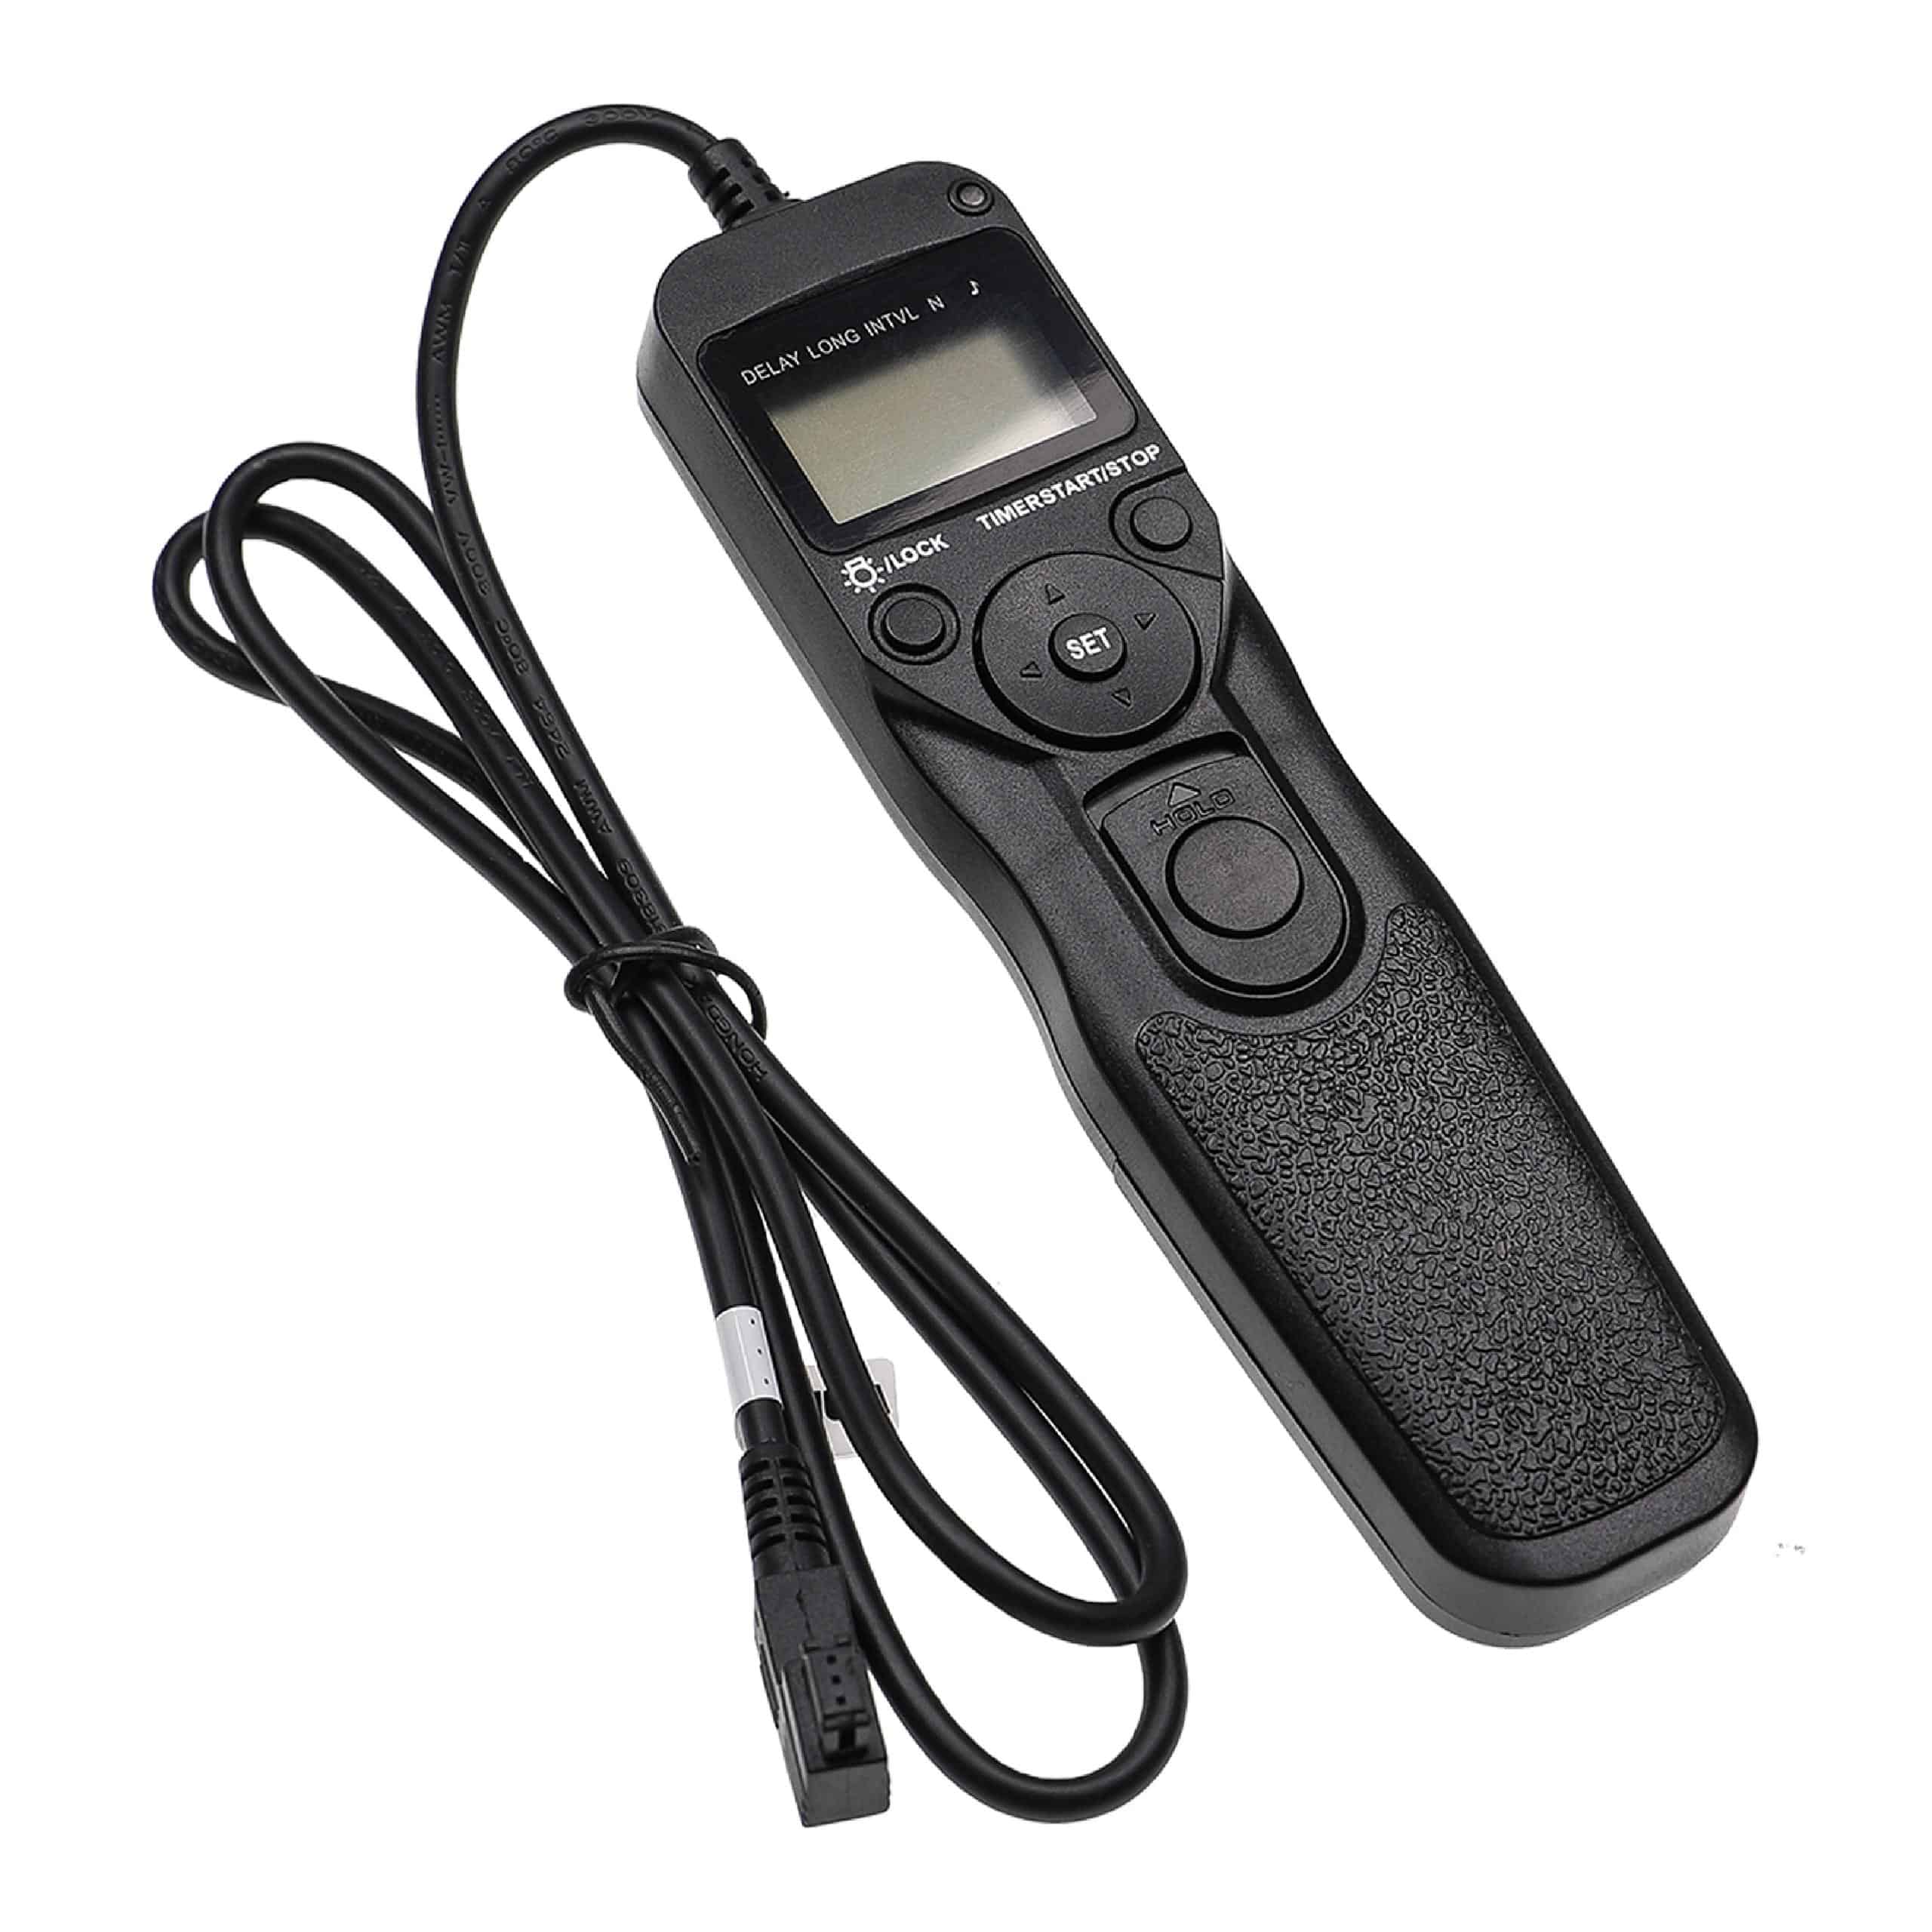 Remote Trigger as Exchange for Konica Minolta RC-1000L for Camera etc. + Timer, 2-Step Shutter, 1 m Lead